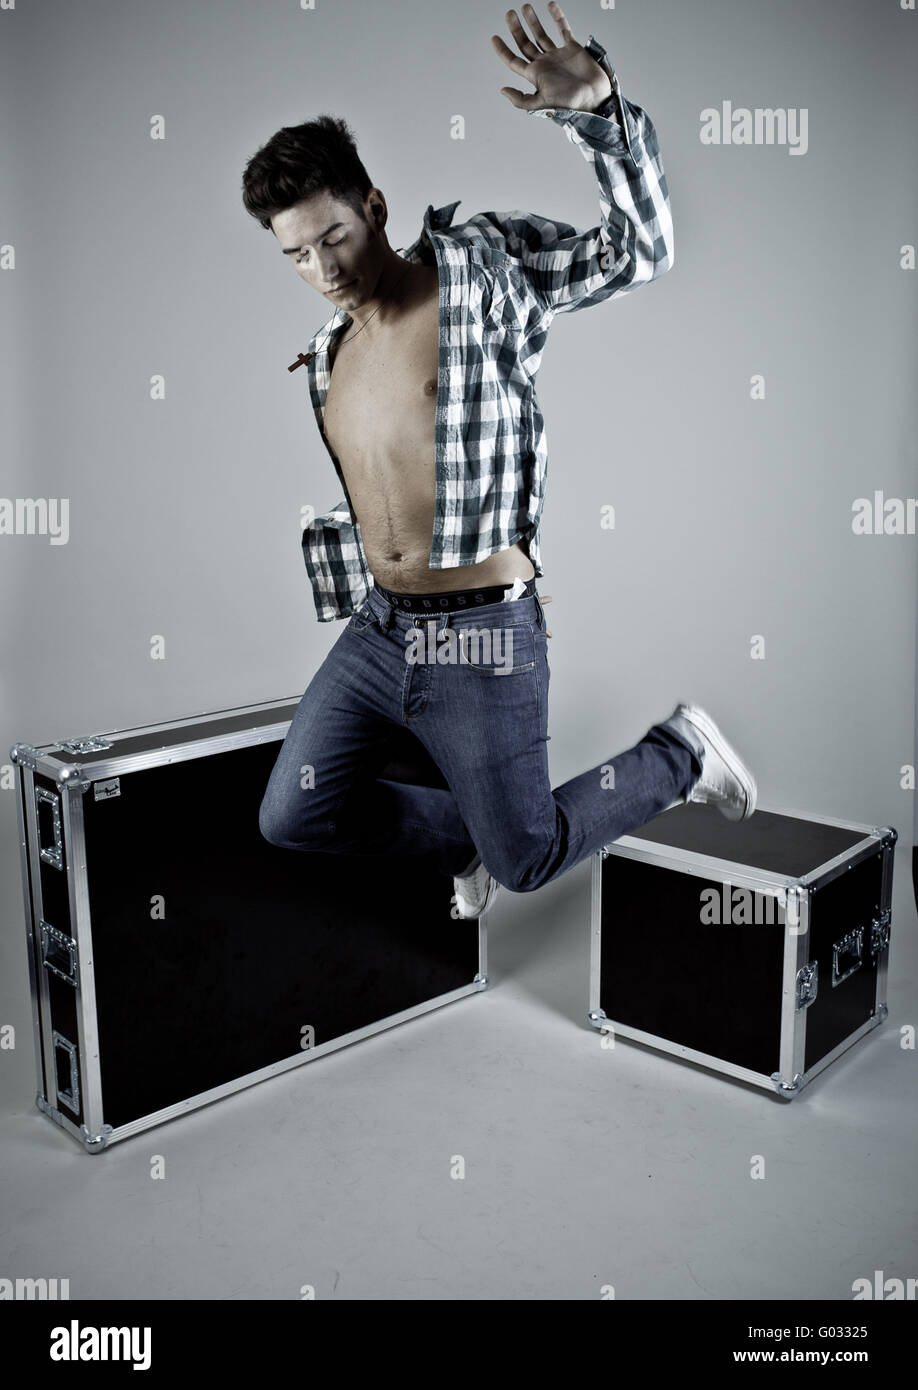 jump modeling, in actions, high five Stock Photo